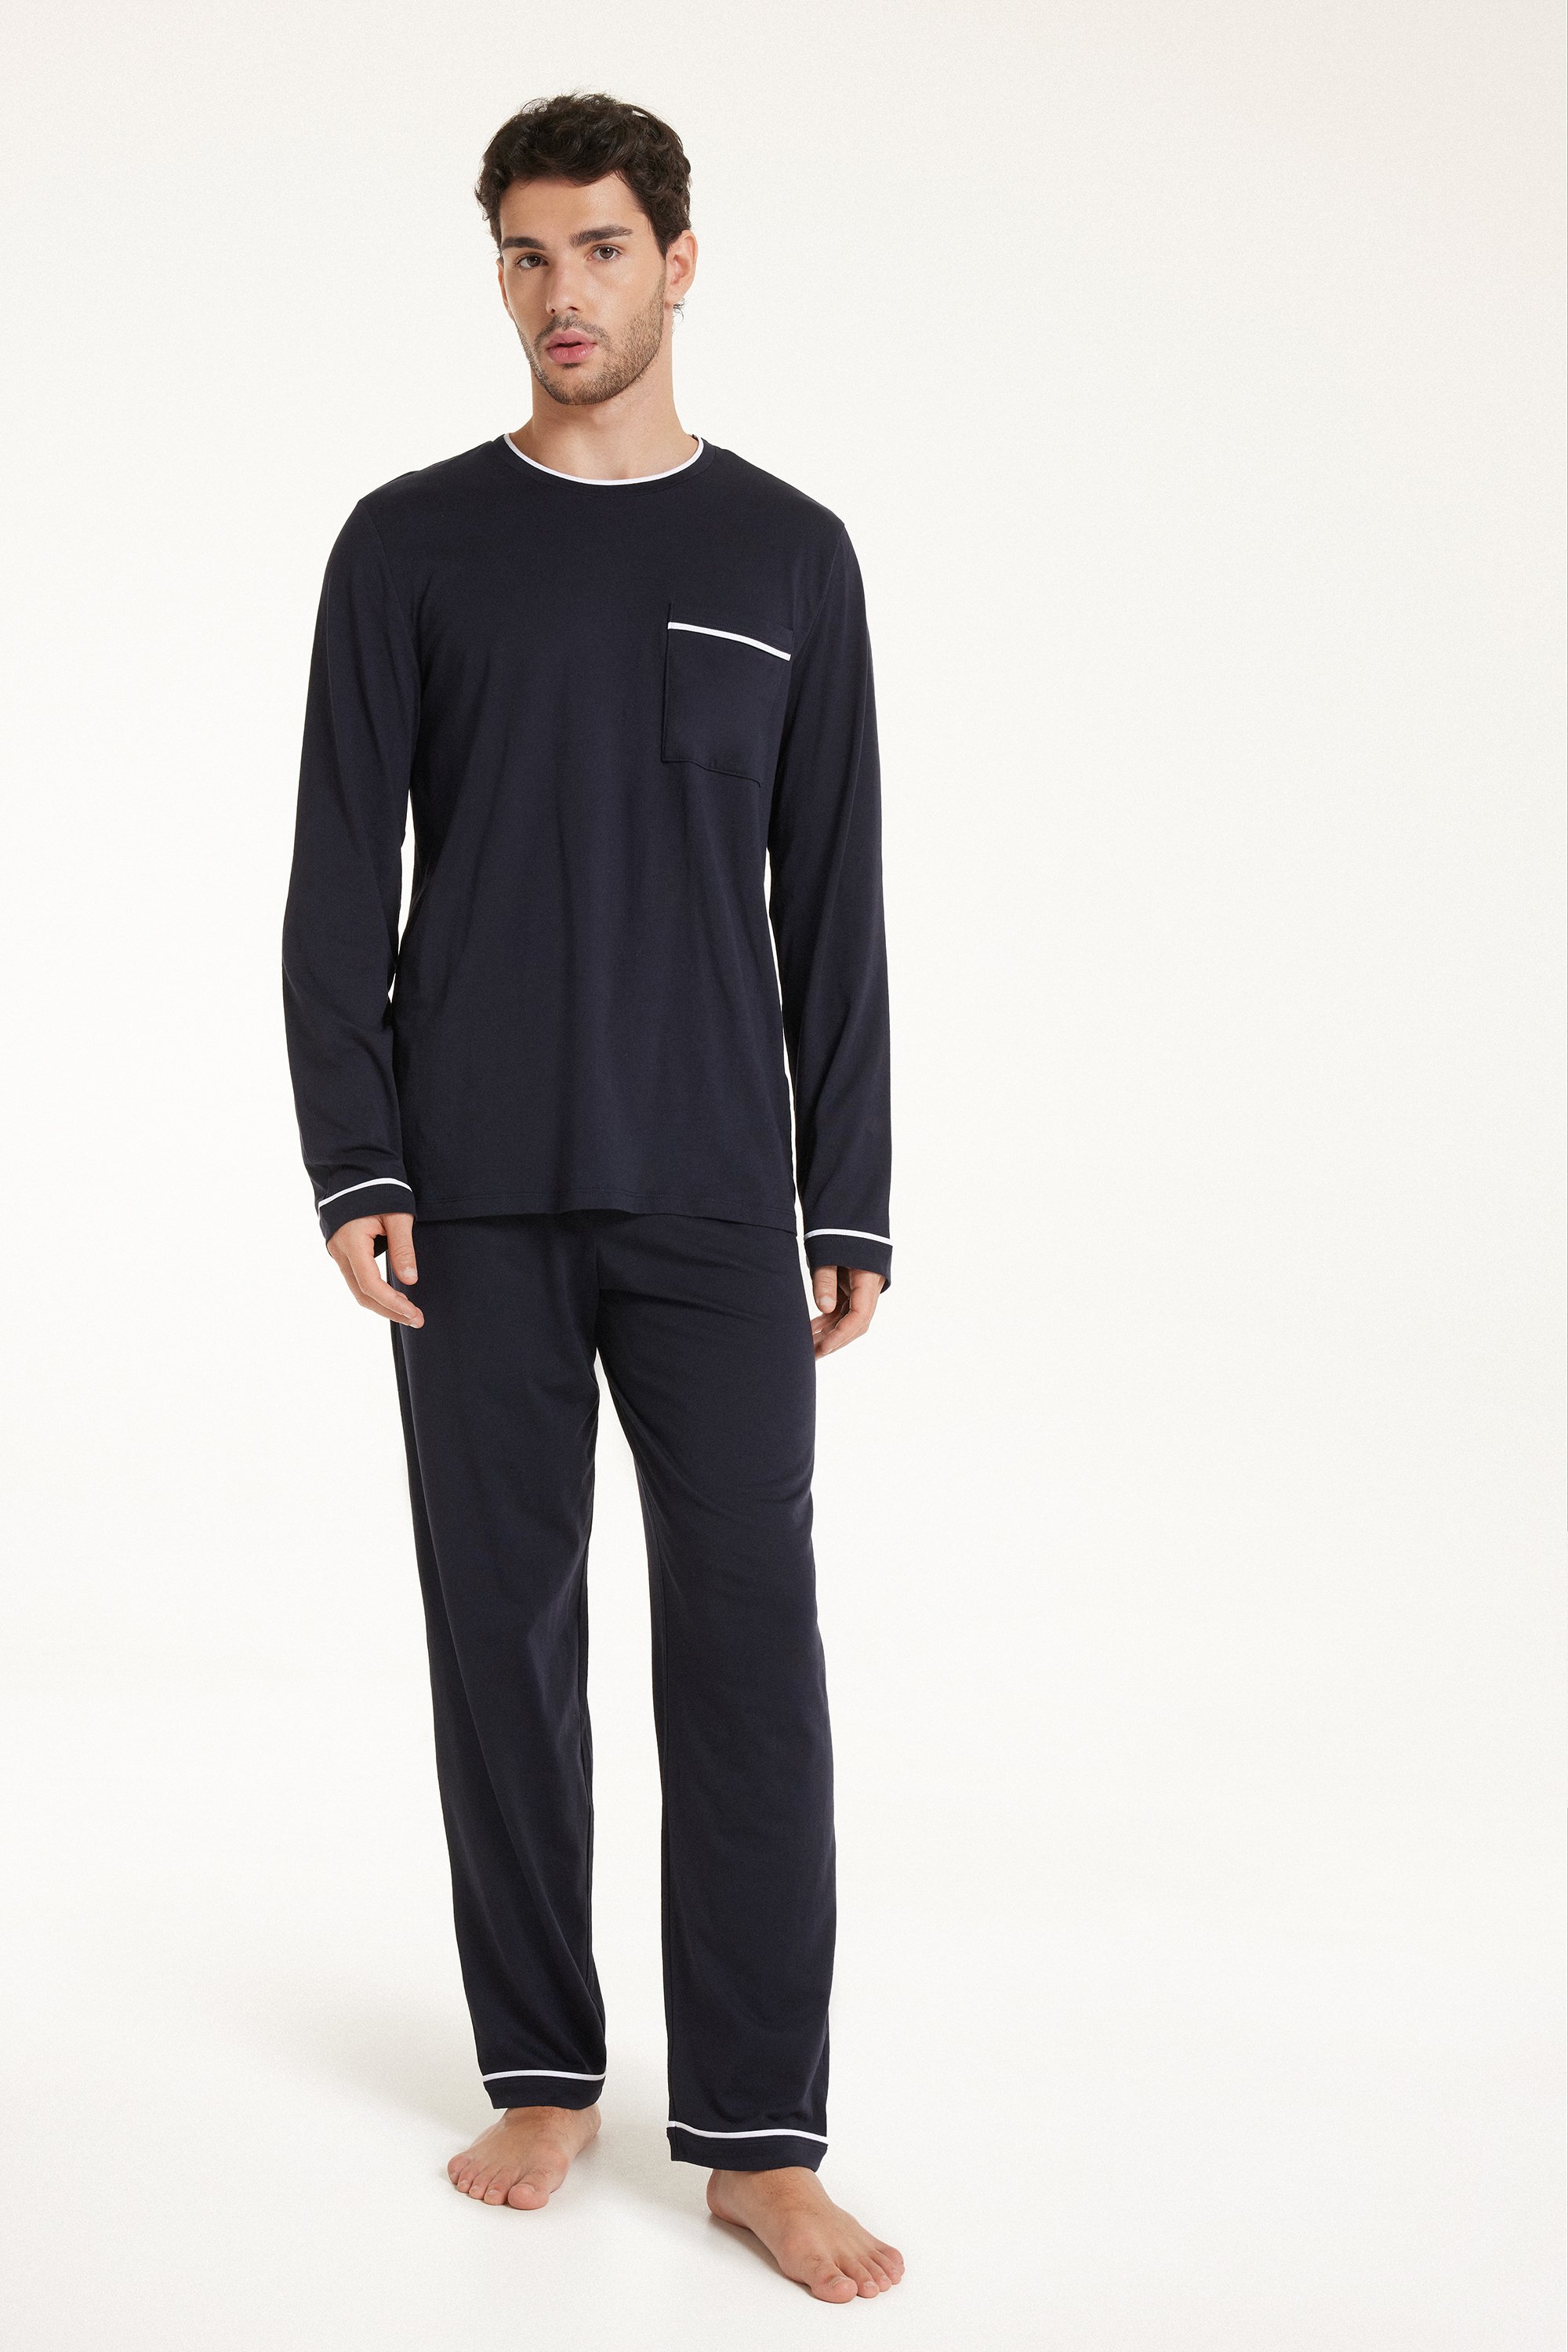 Men’s Full-Length Cotton Pajamas with Piping